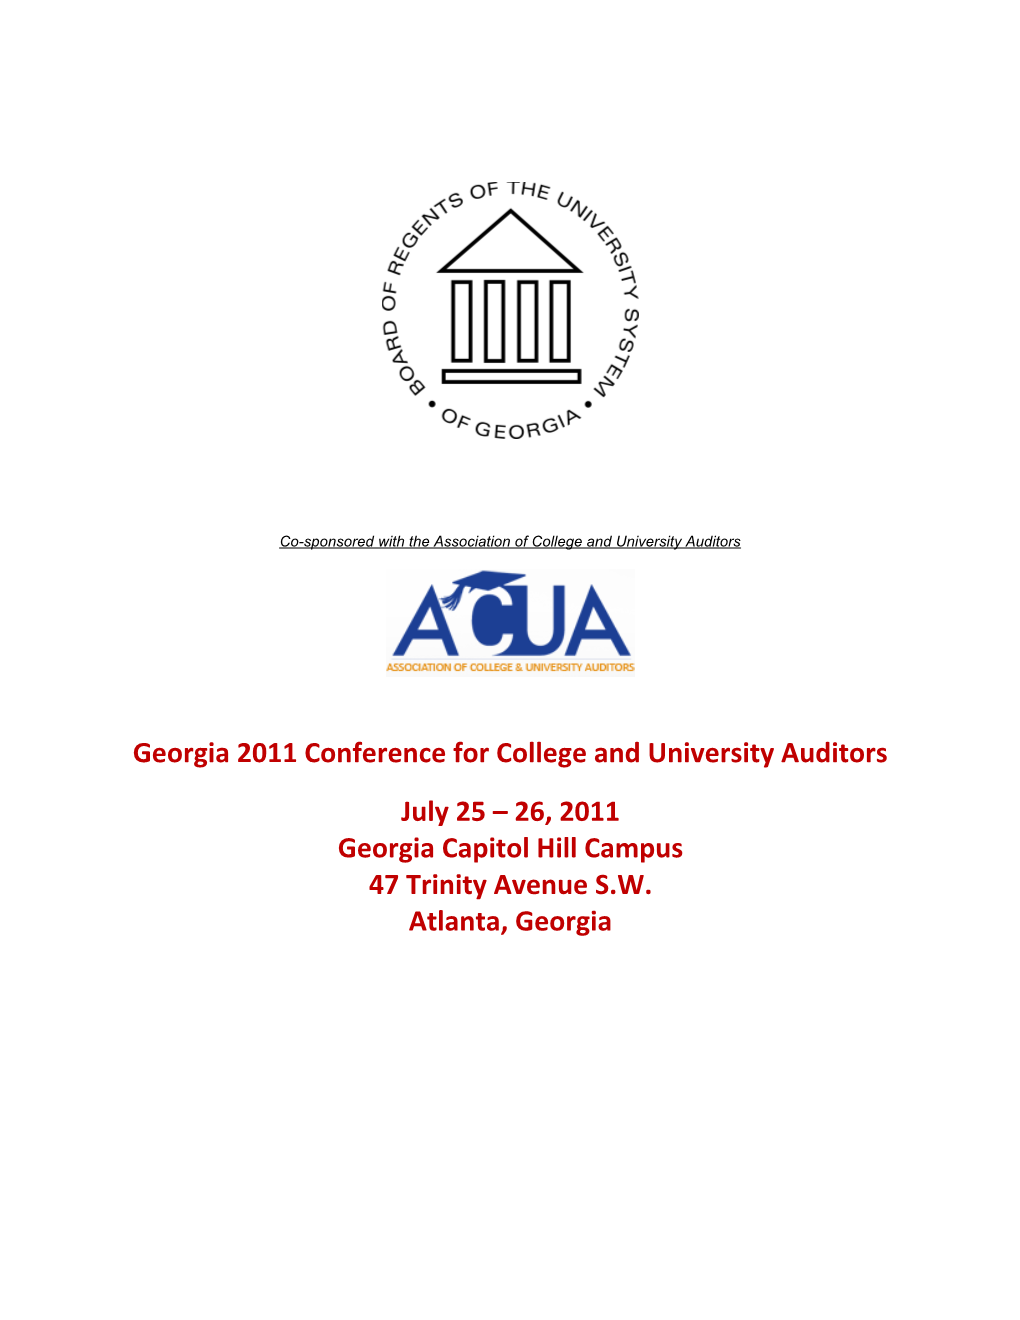 Georgia 2011 Conference for College and University Auditors